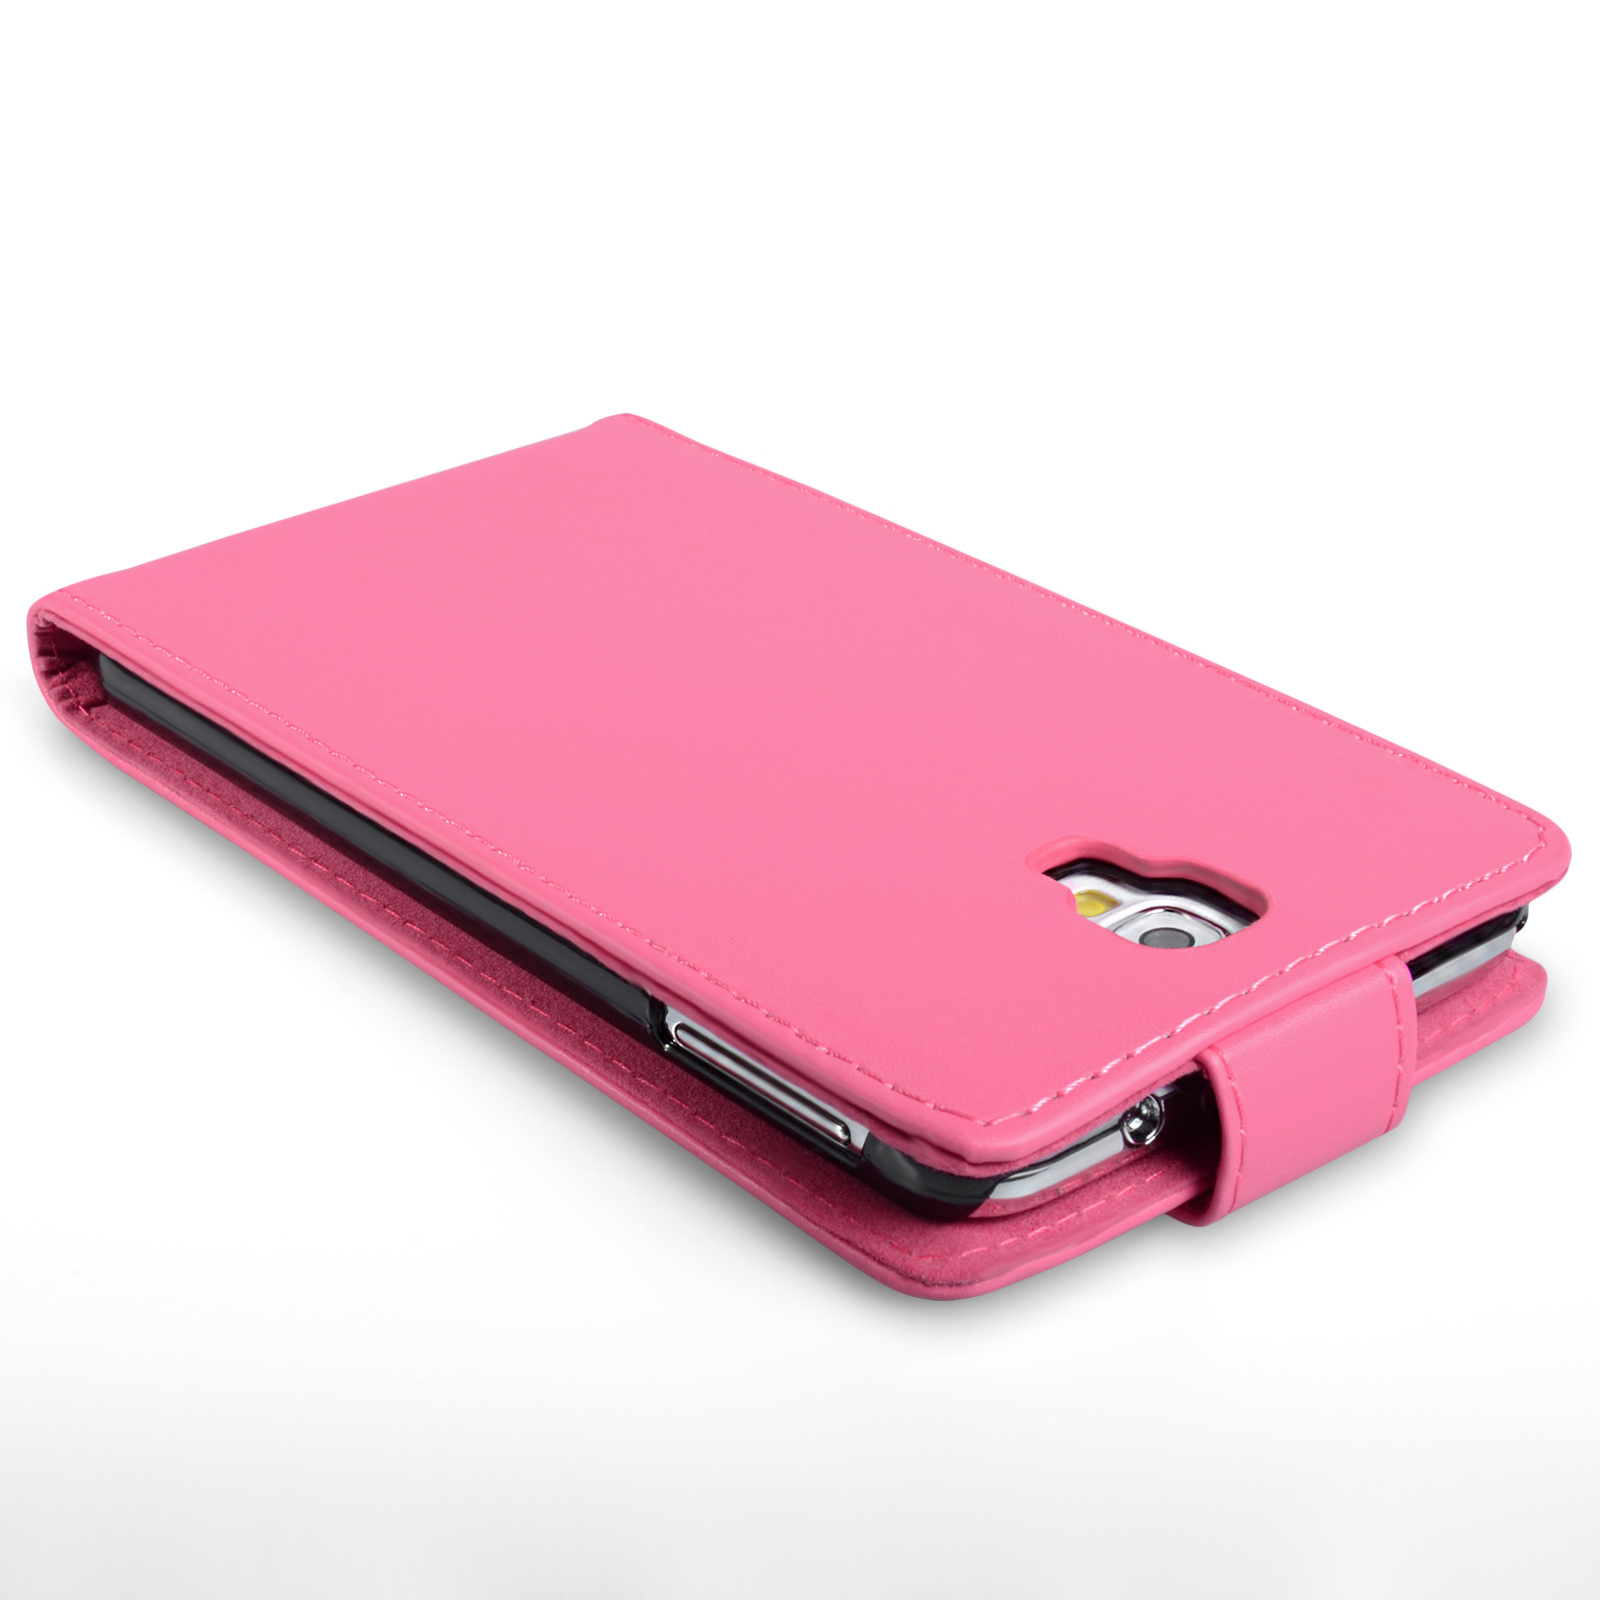 YouSave Samsung Galaxy Note 3 Neo Leather-Effect Flip Case - Hot Pink